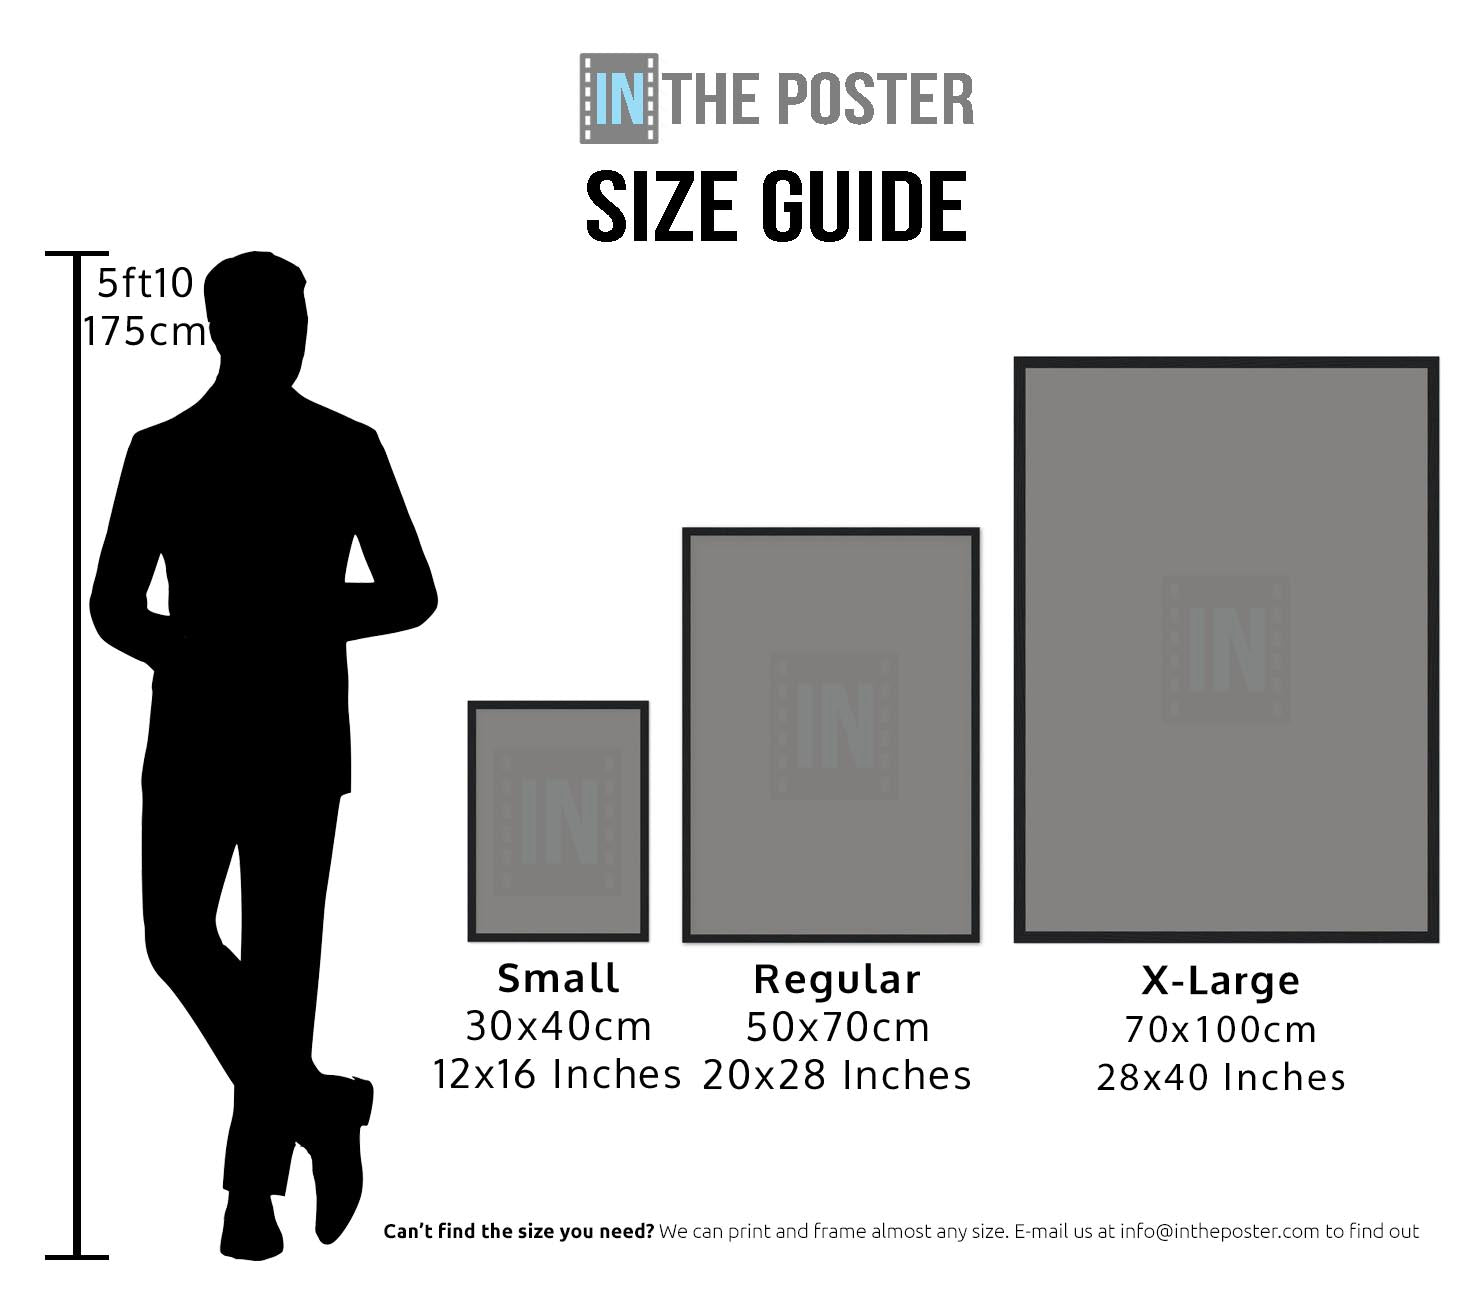 A guide showing the size of printed poster designs, small, regular and extra large frames